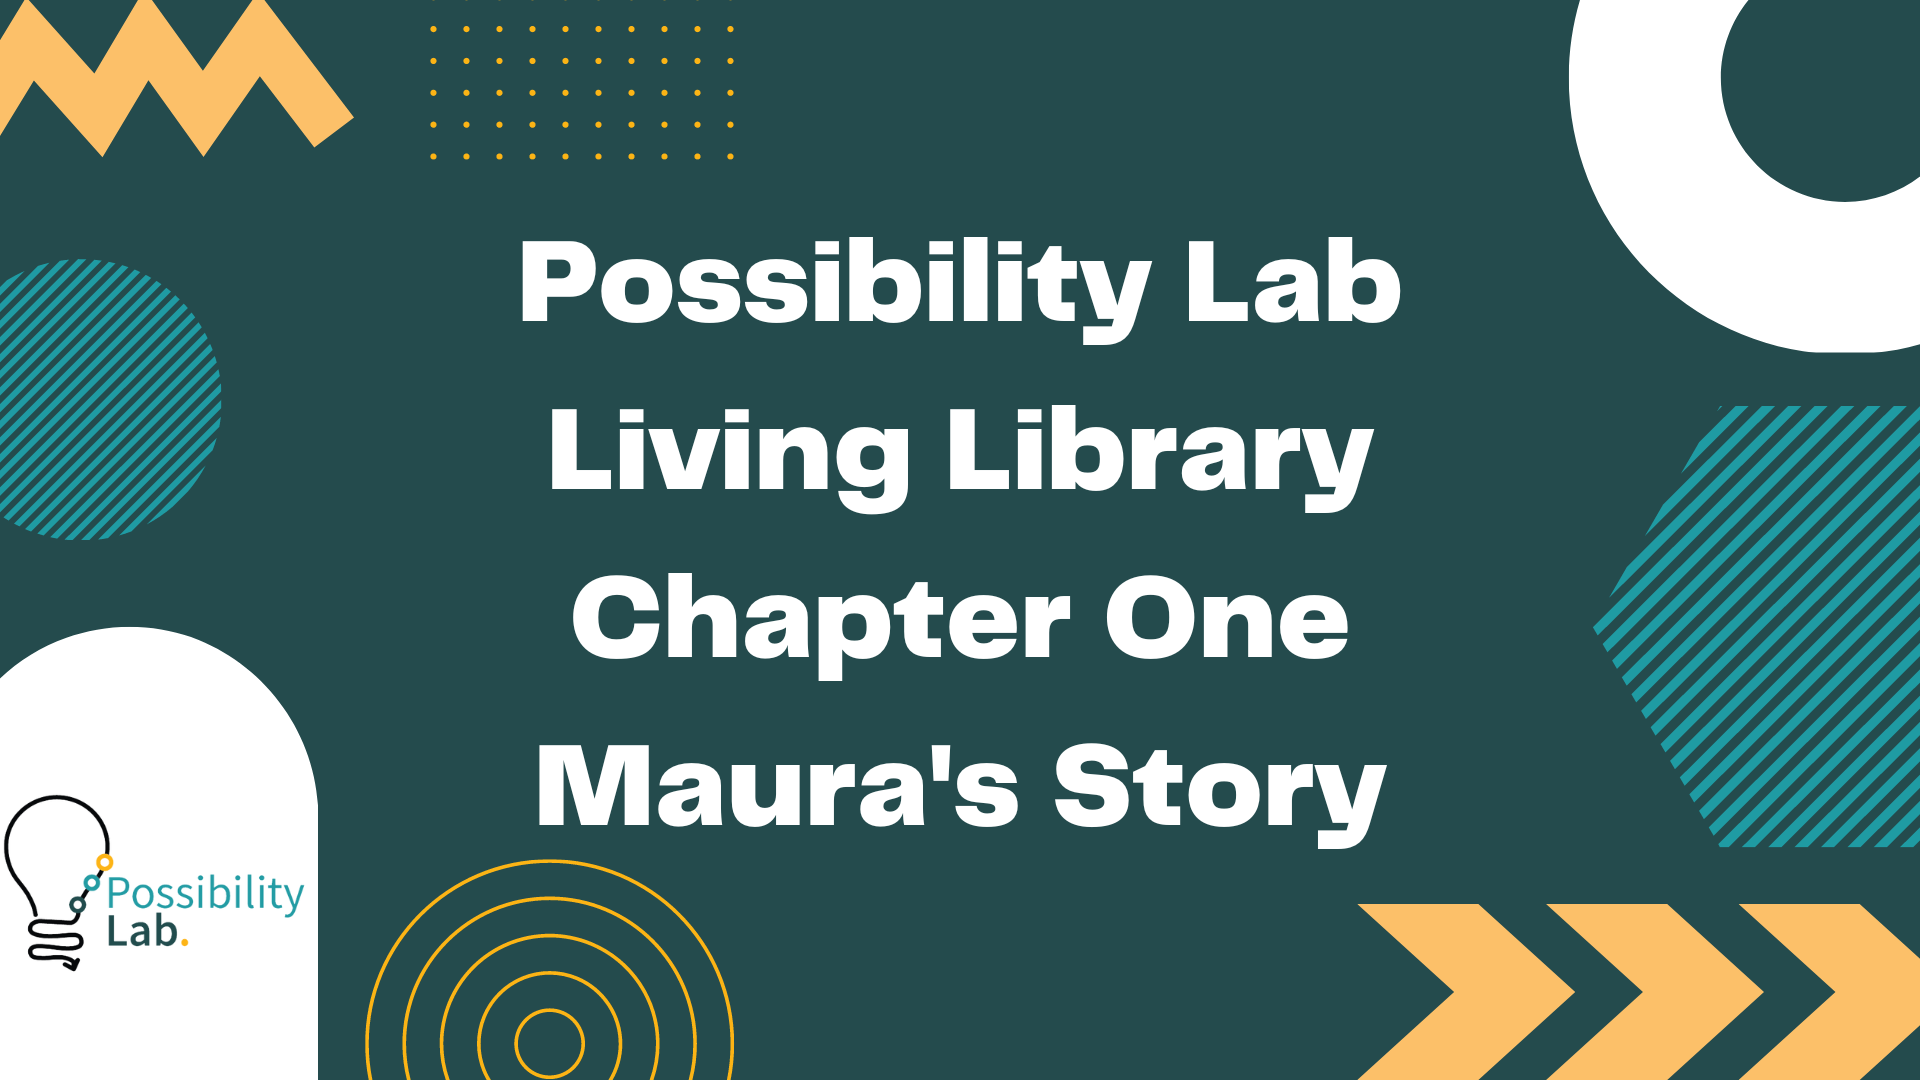 A slide from our living library videos. It has a green background and squiggle designs in white, lighter green and orange. The possibility lab logo is on the bottom left and text on the slide reads Possibility Lab Living Library Chapter One Maura's Story